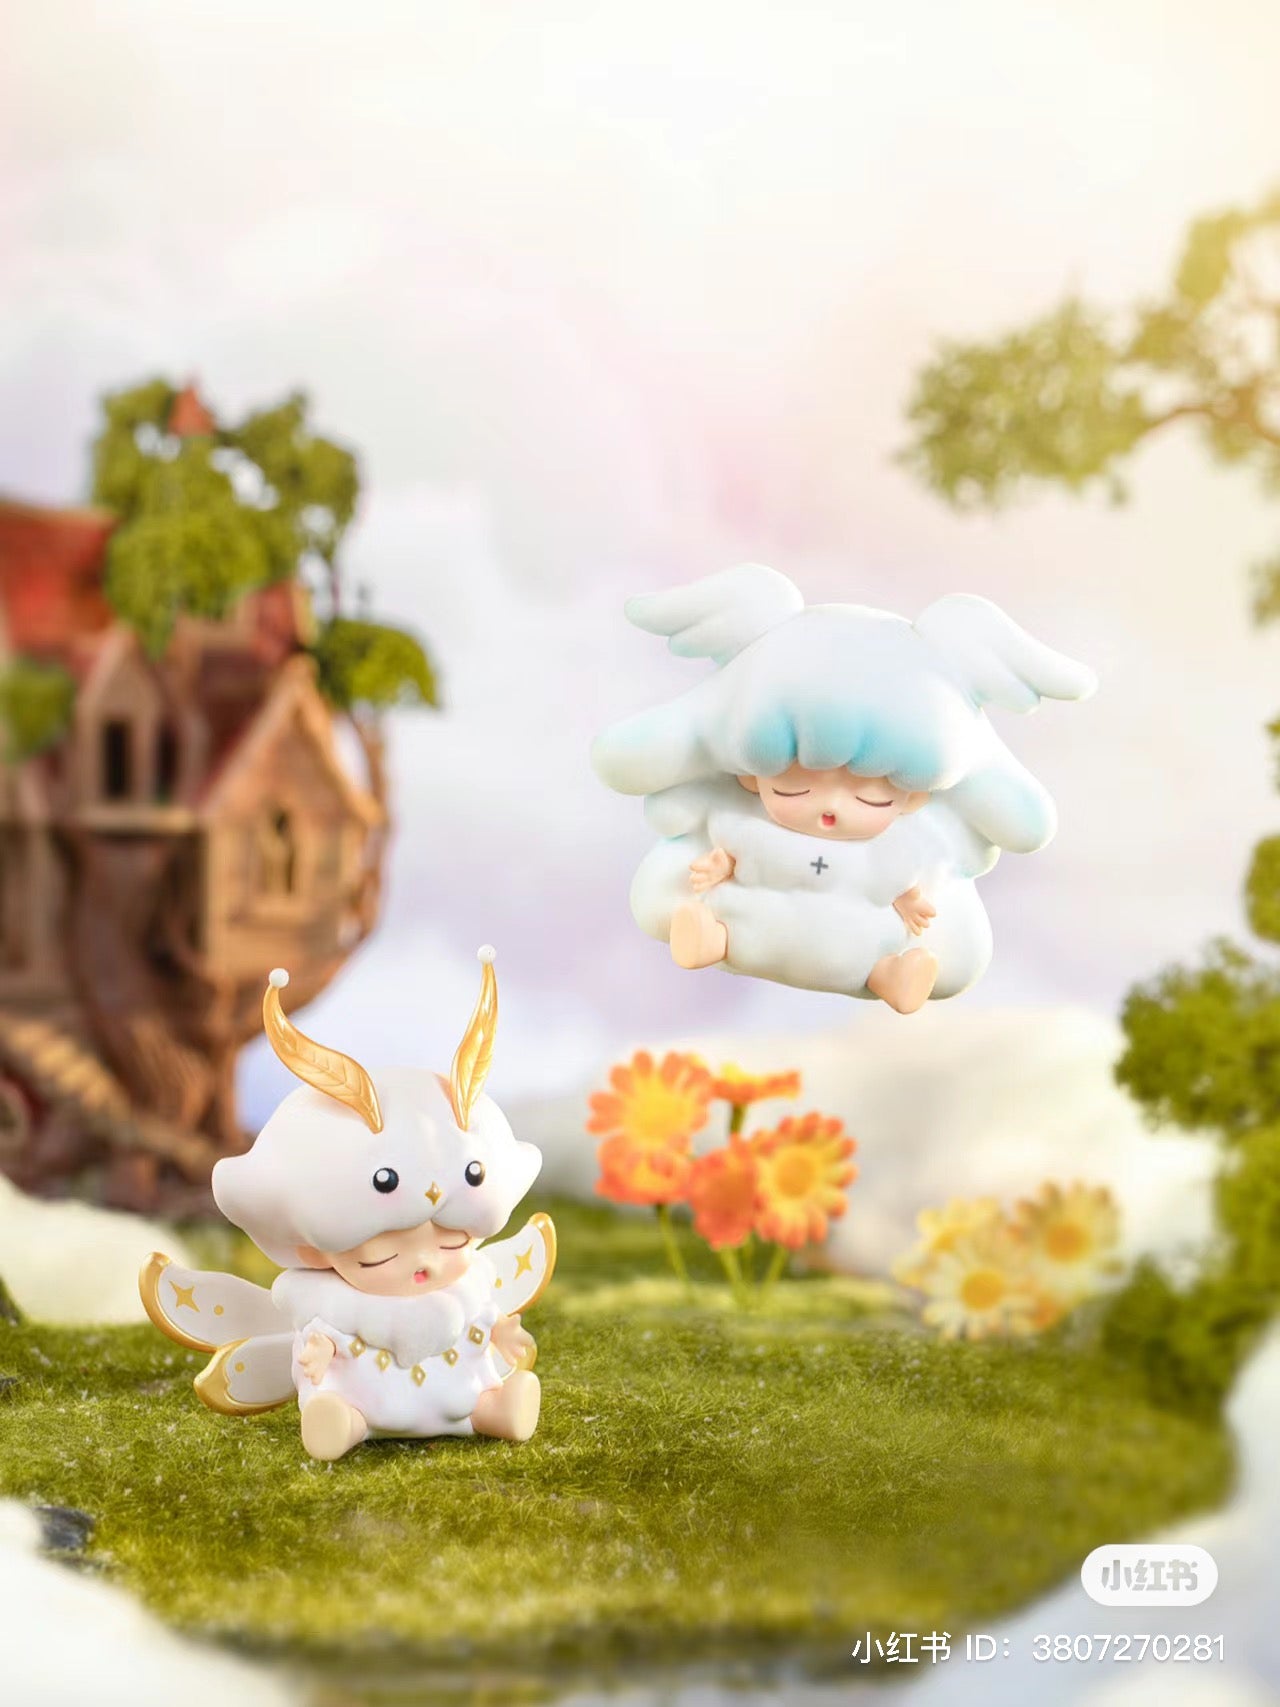 YUMO Natural Journey Blind Box Series - Preorder